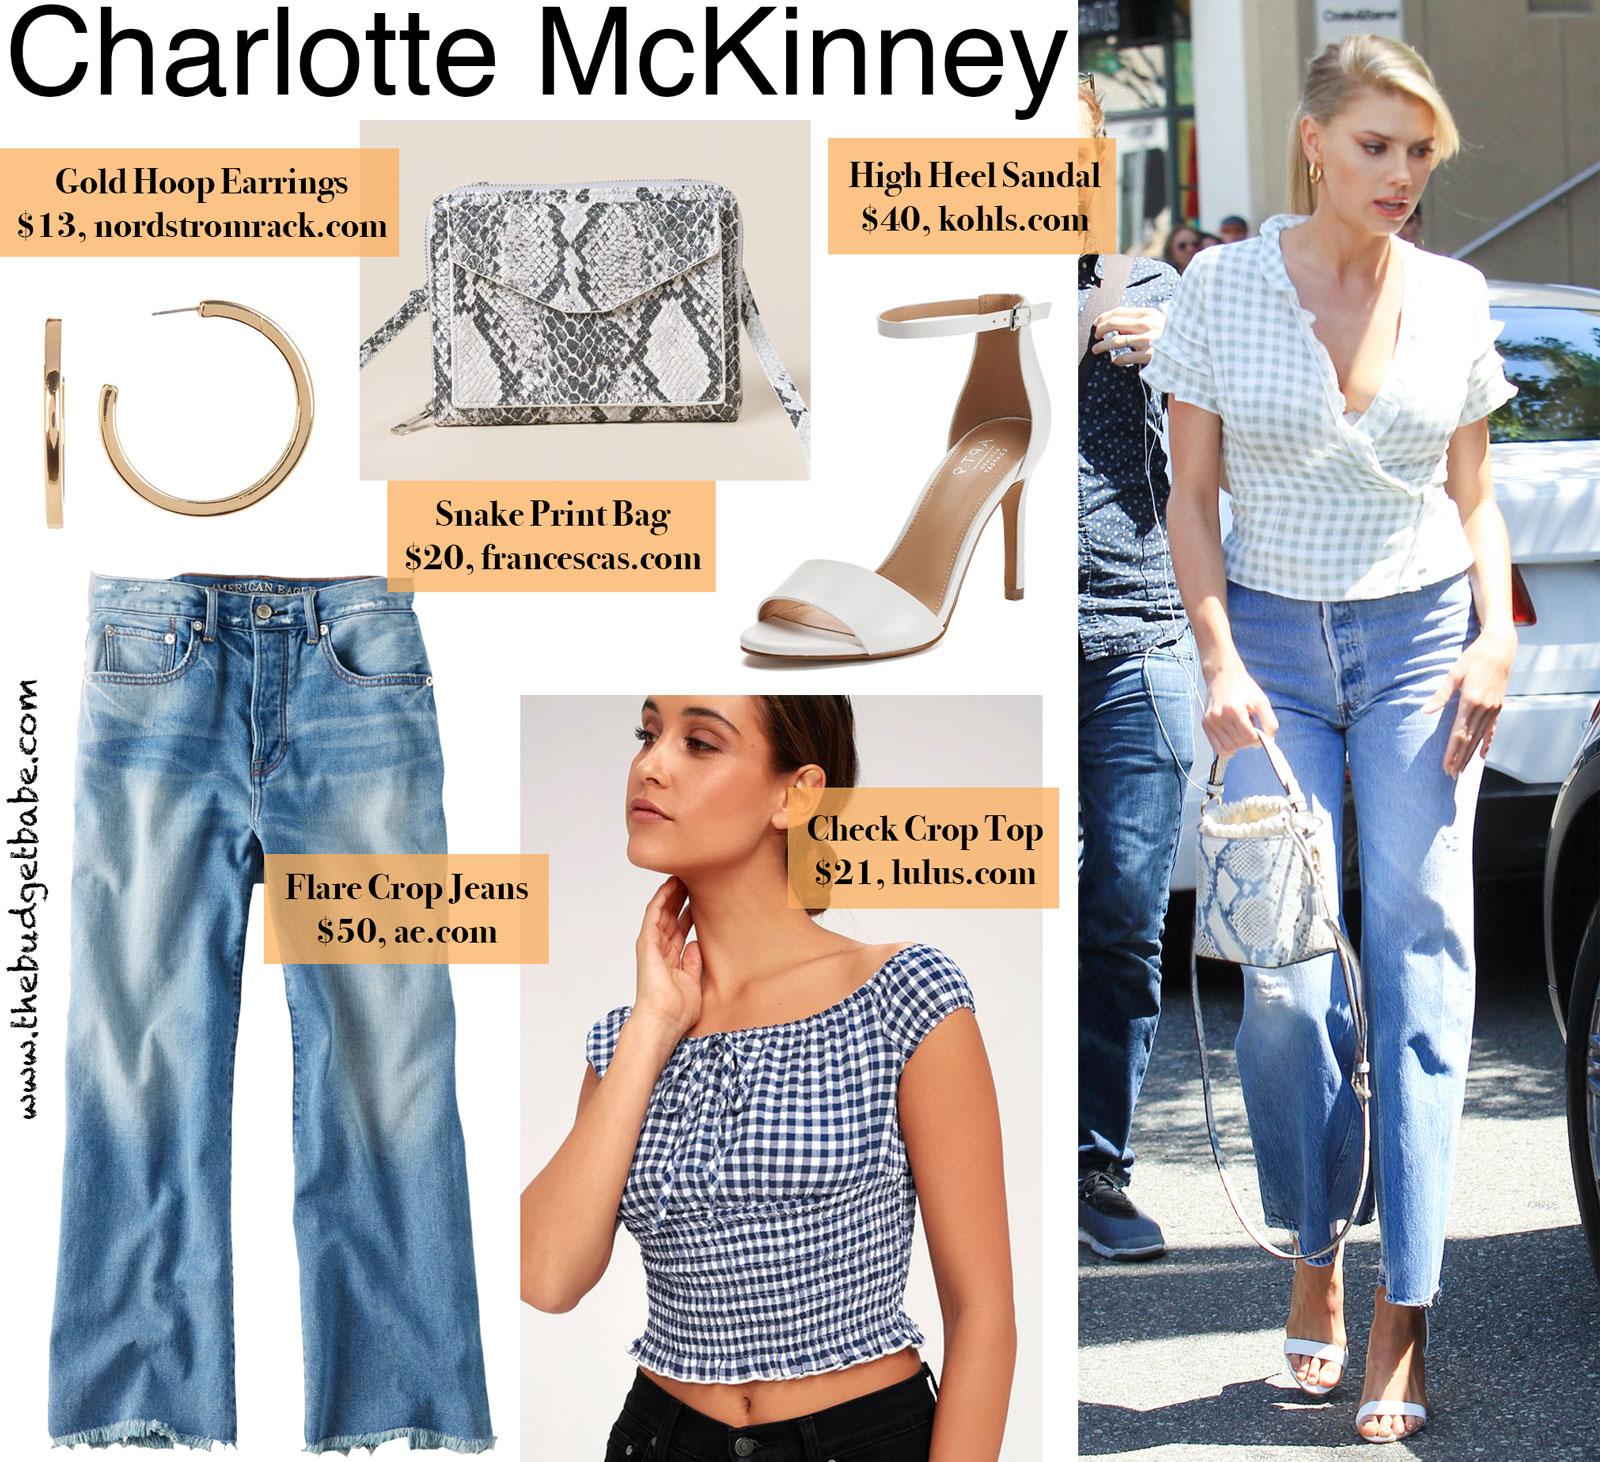 Charlotte McKinney Check Crop Top Look for Less